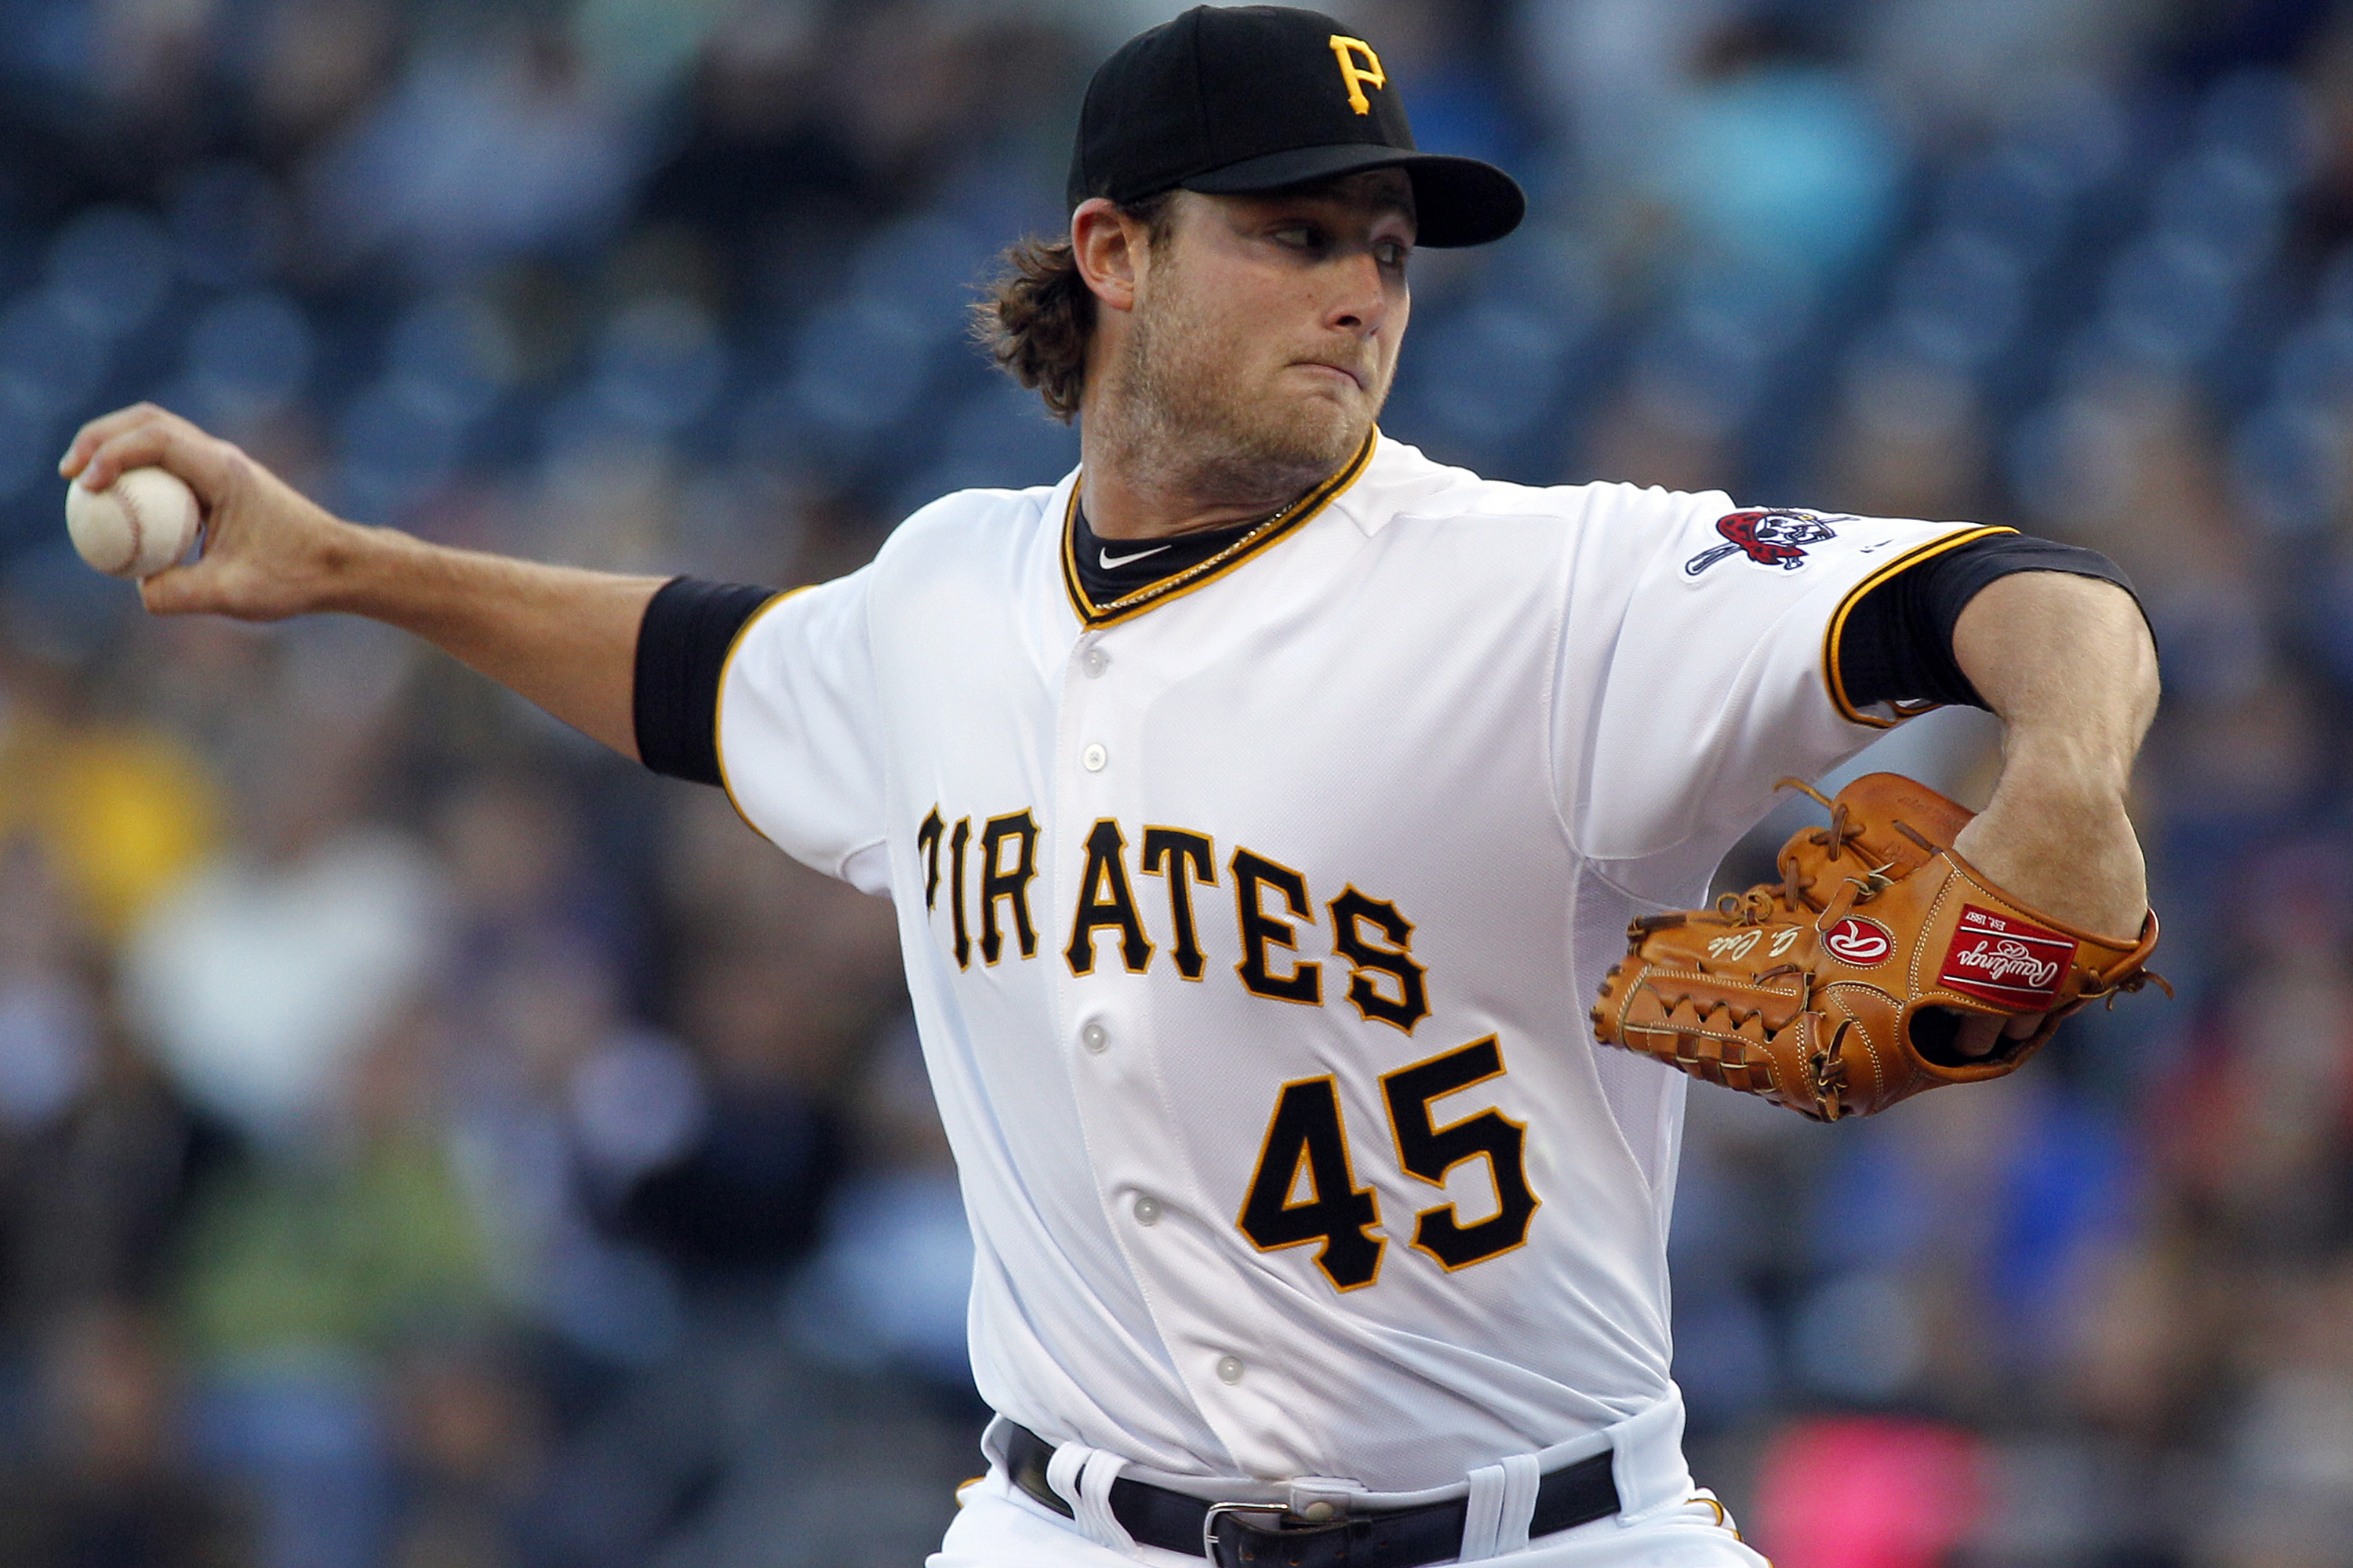 Pirates' Gerrit Cole could be next elite pitcher in 2015 - Sports